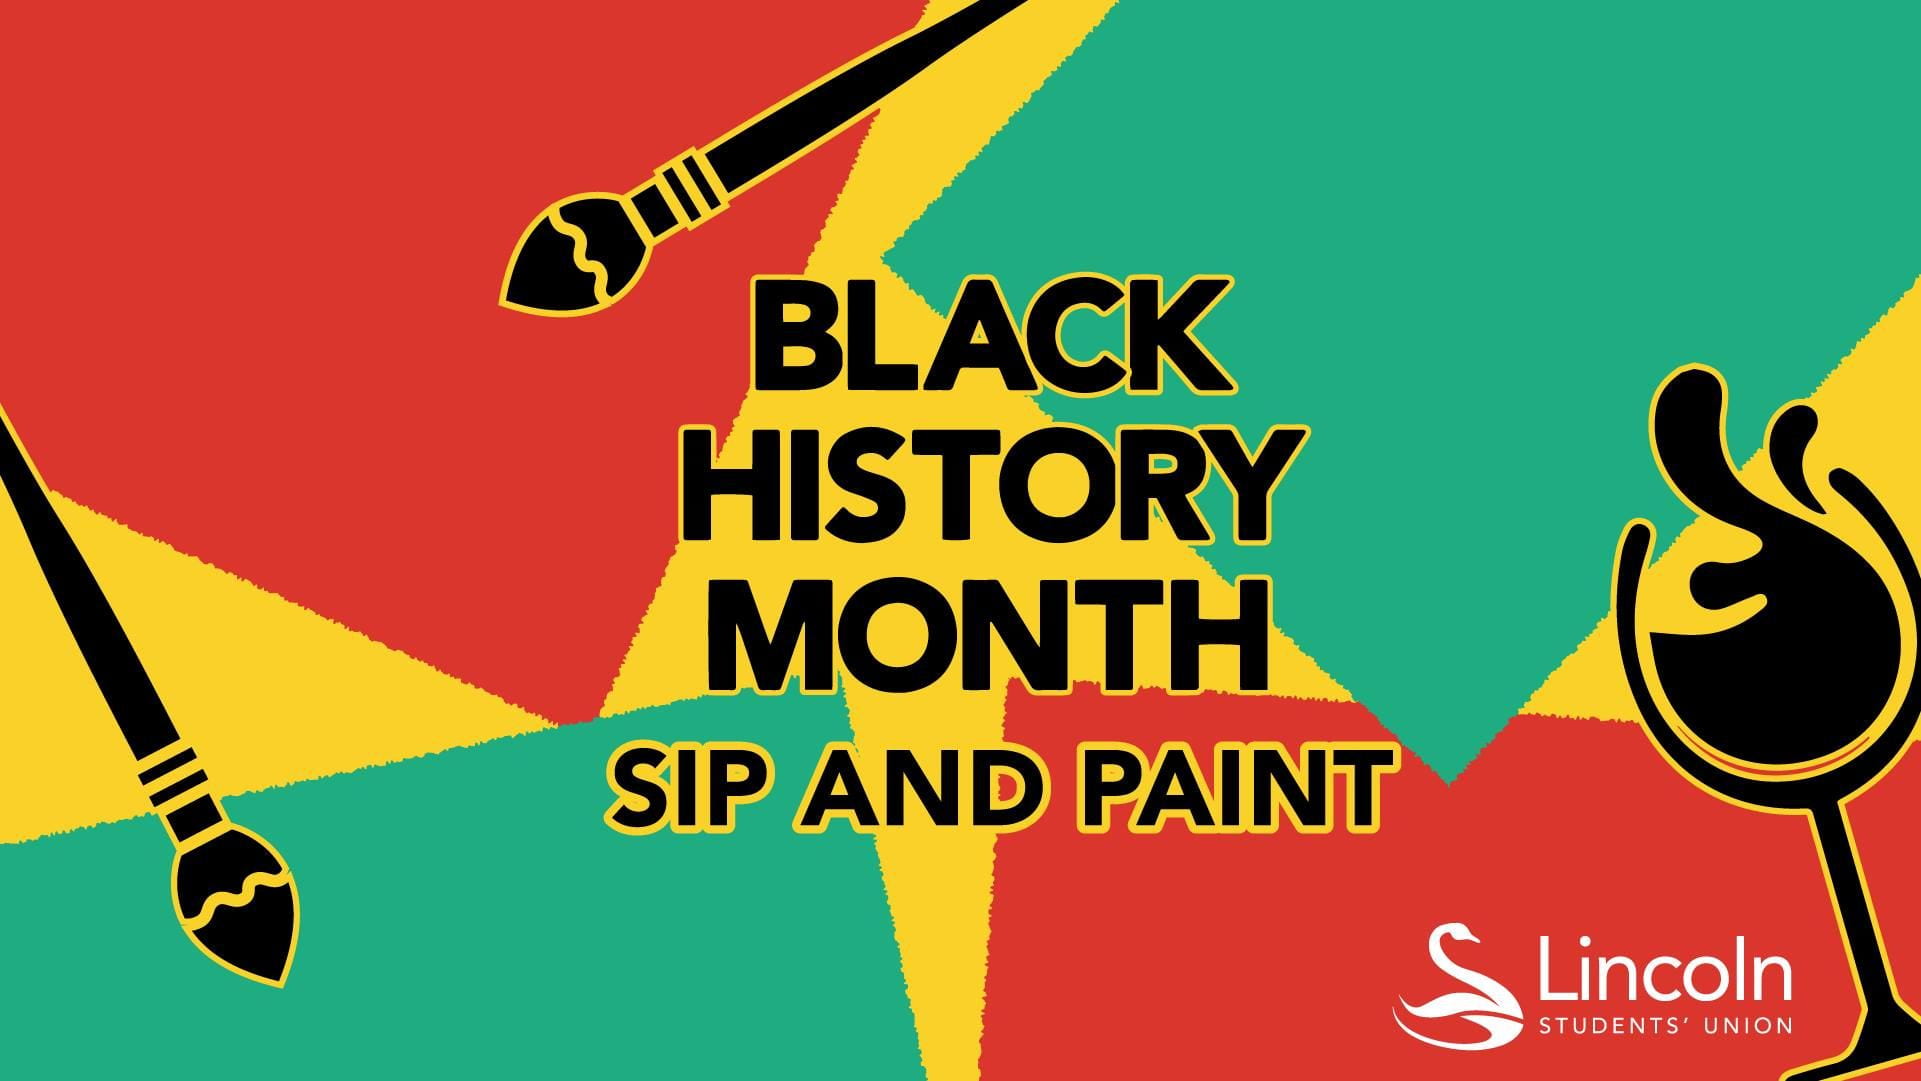 Lincoln SU's poster for Black History Month, Sip and Paint